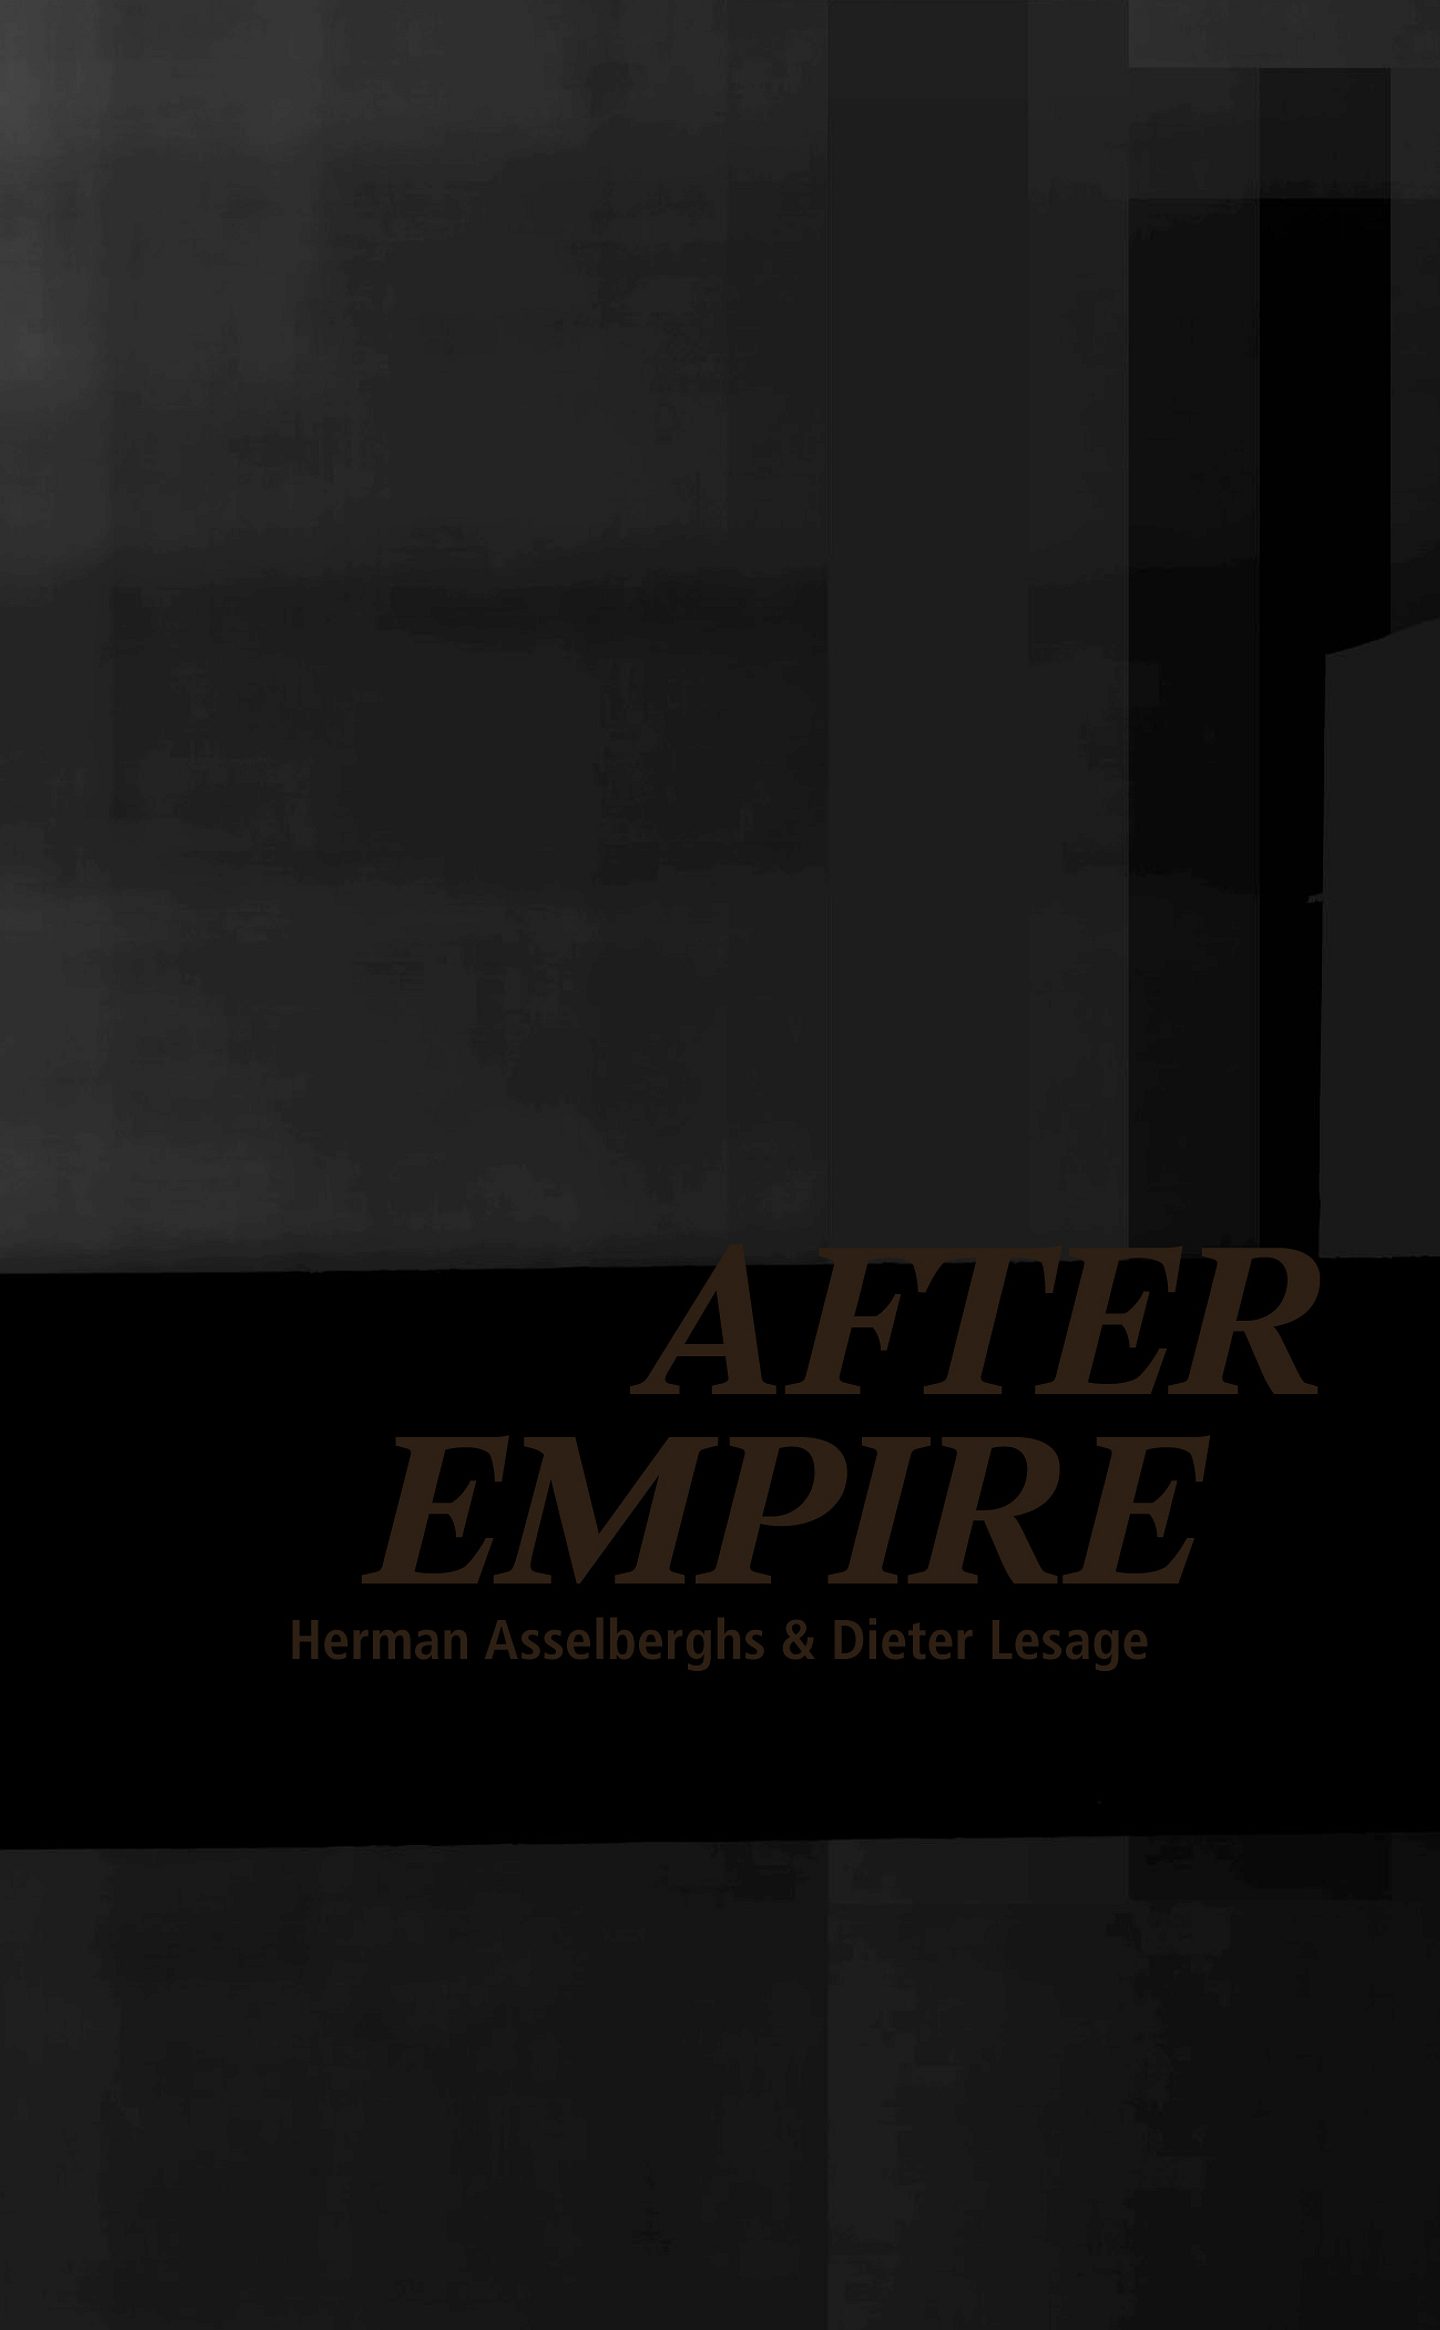 2013 After Empire